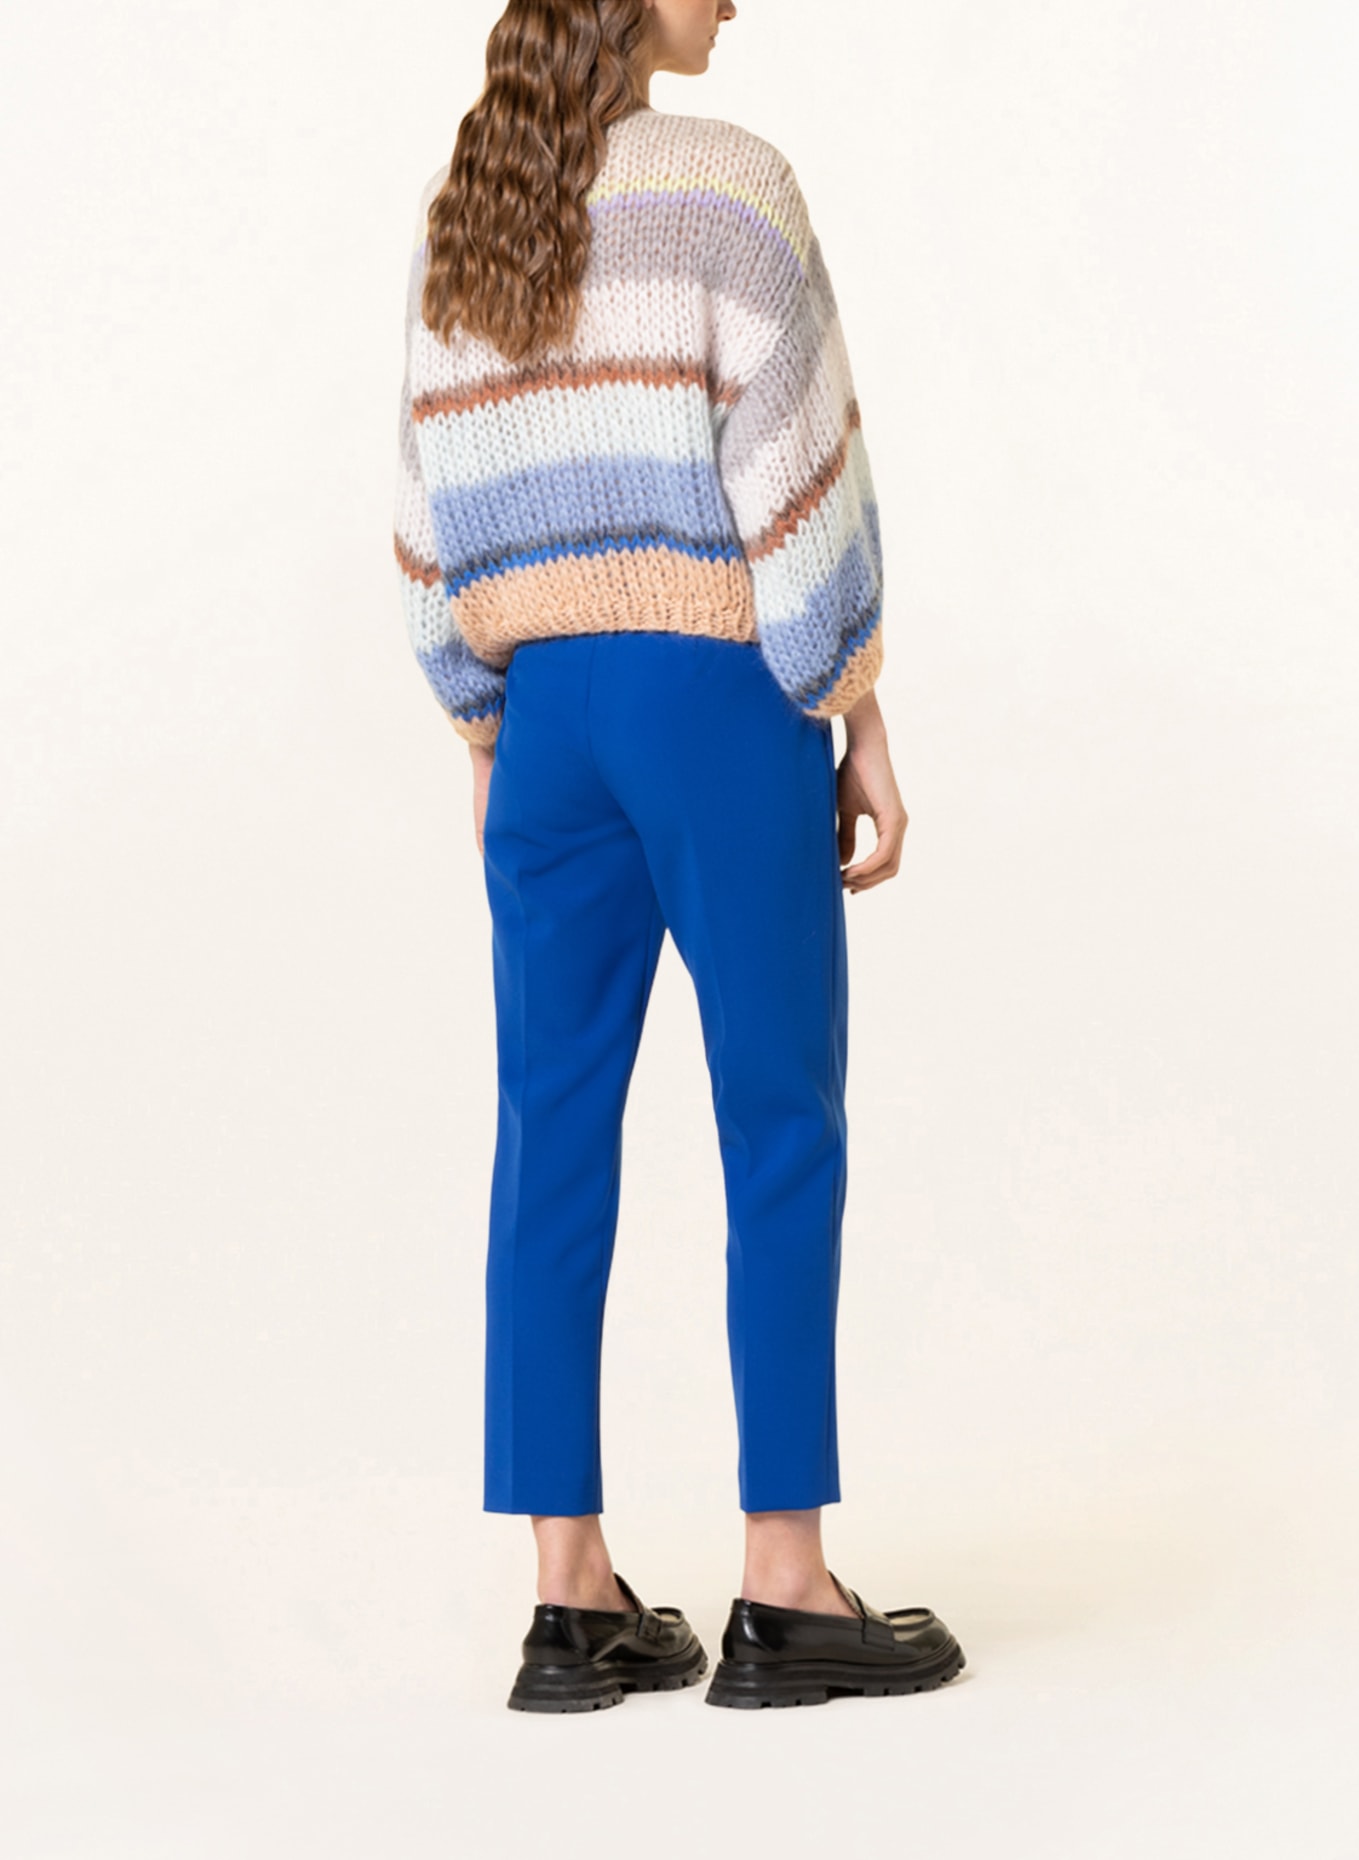 MAIAMI Sweater with mohair, Color: WHITE/ GRAY/ BLUE (Image 3)